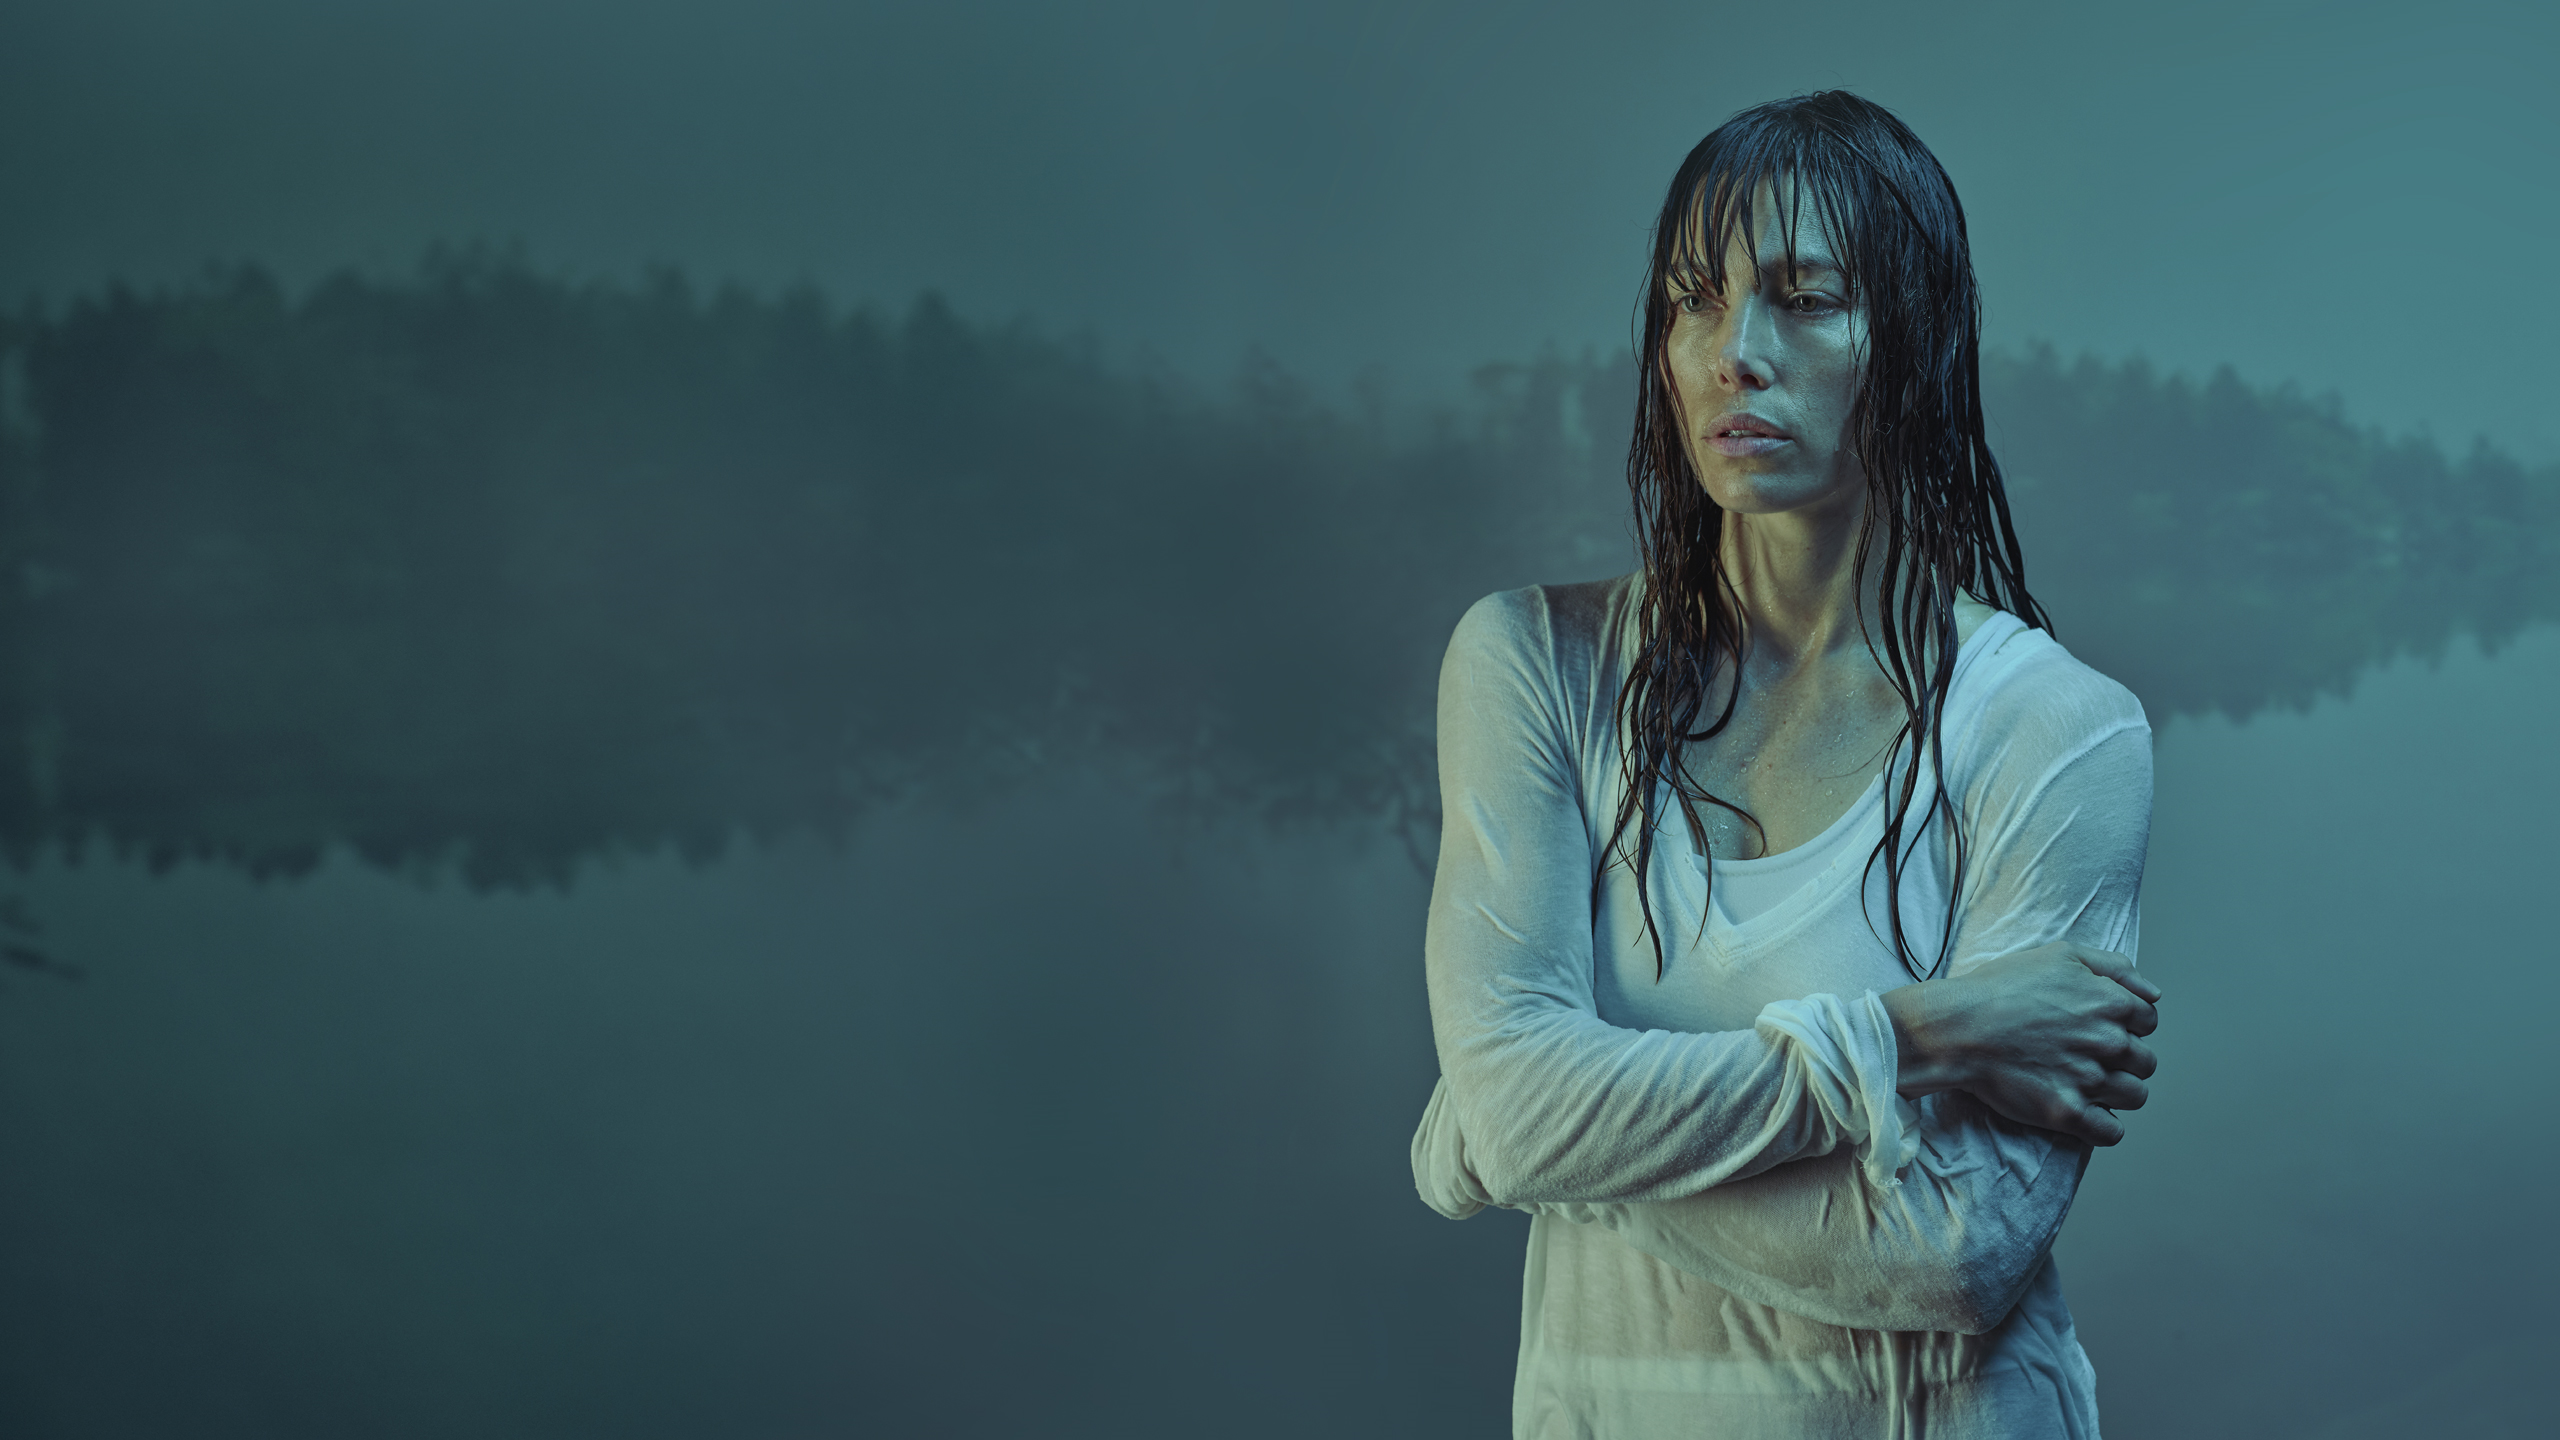 LISTEN: Could The Sinner be the best show of 2017?